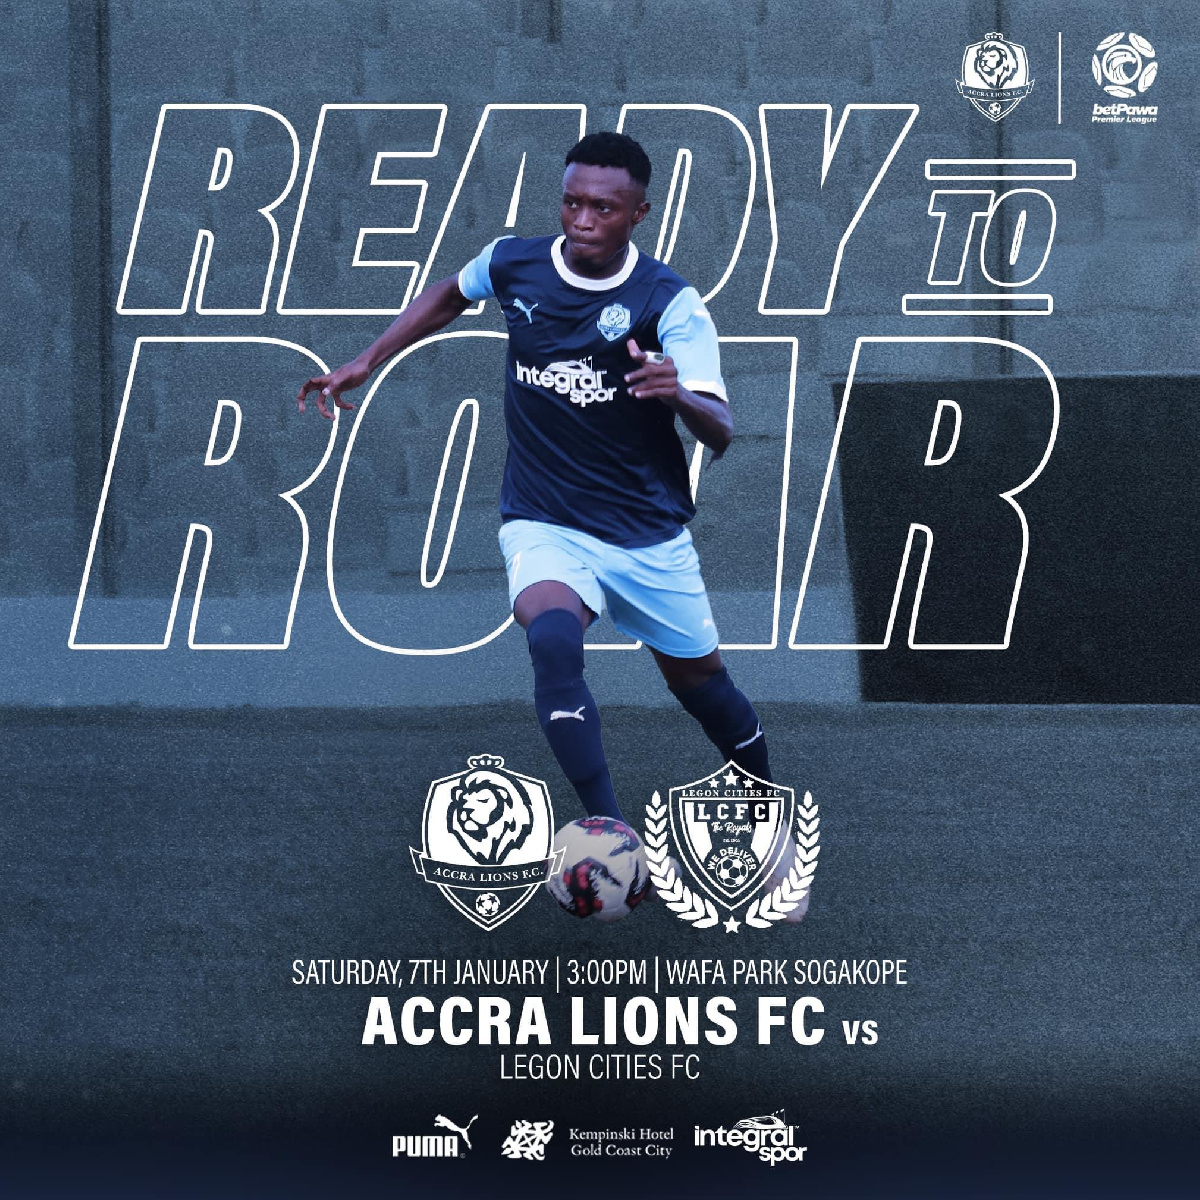 Flyer of the Accra Lions vs. Legon Cities clash